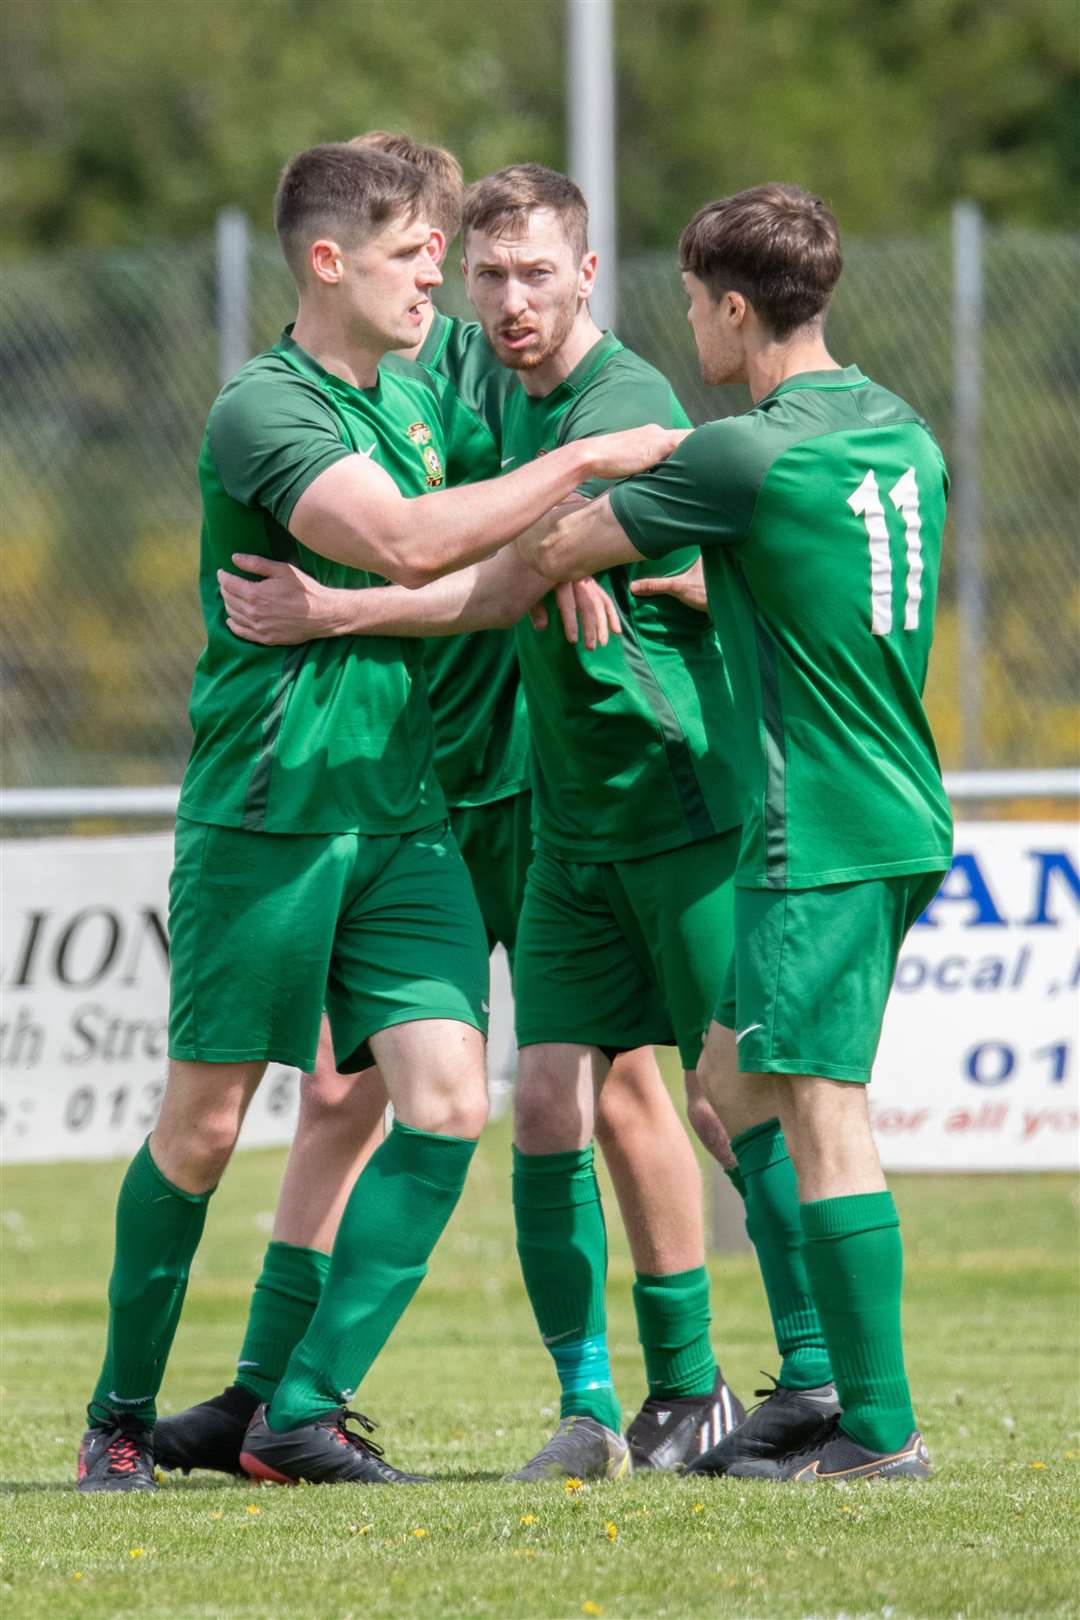 Dufftown's Ben Cullen (centre) celebrates the opening goal. ..Dufftown FC (2) vs Forres Thistle FC (2) - Dufftown FC win 5-3 on penalties - Elginshire Cup Final held at Logie Park, Forres 14/05/2022...Picture: Daniel Forsyth..